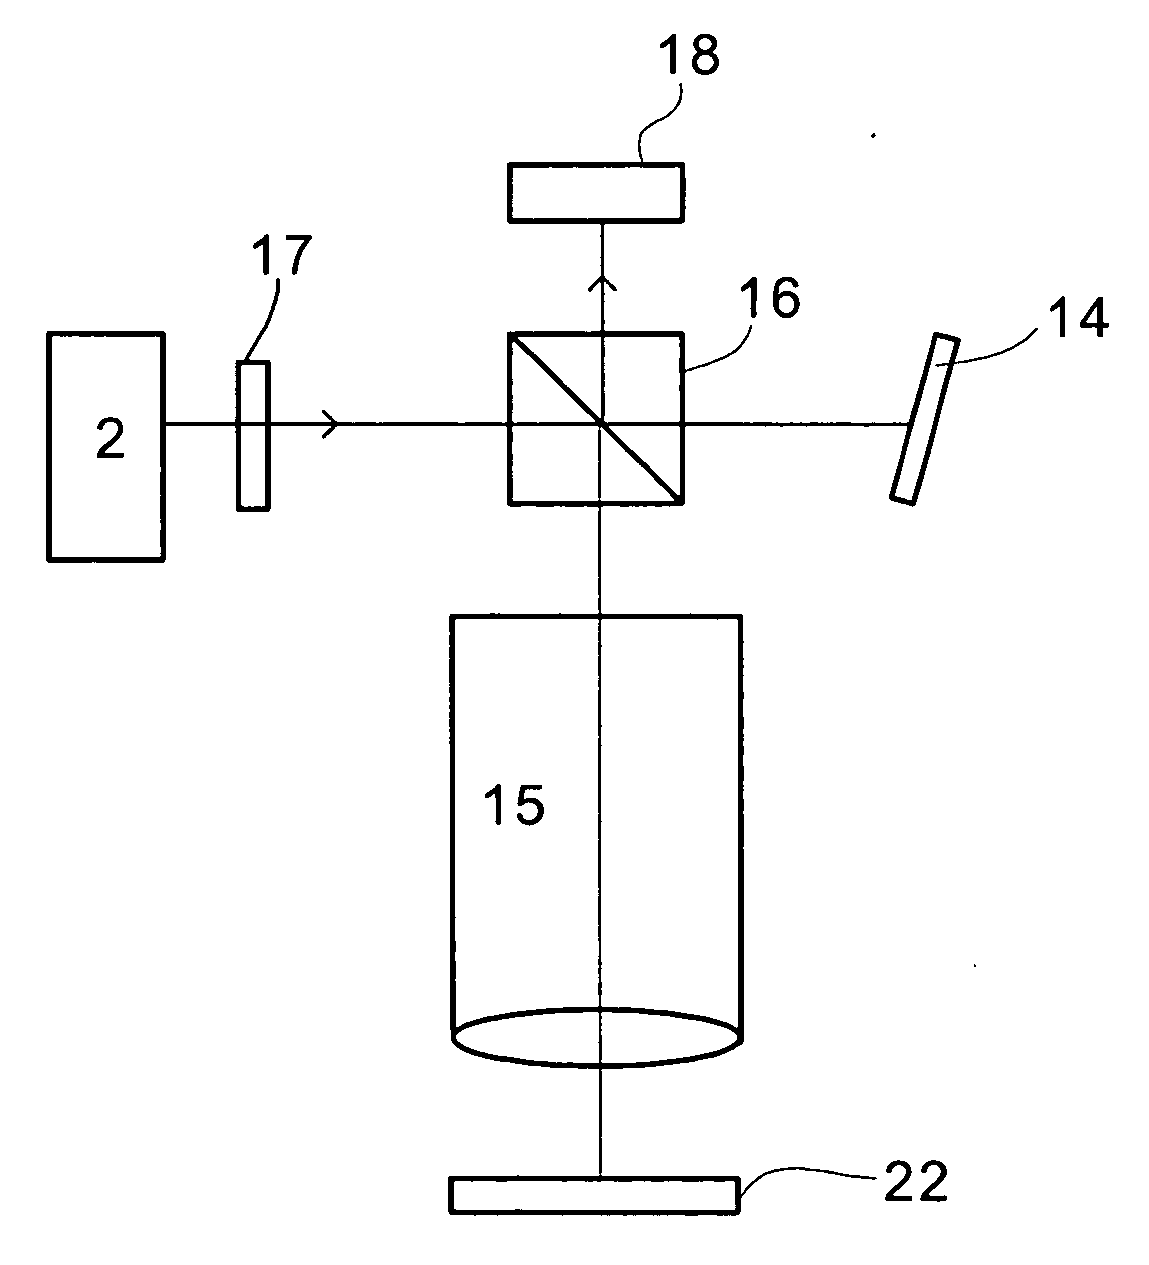 Method of characterising the transmission losses of an optical system